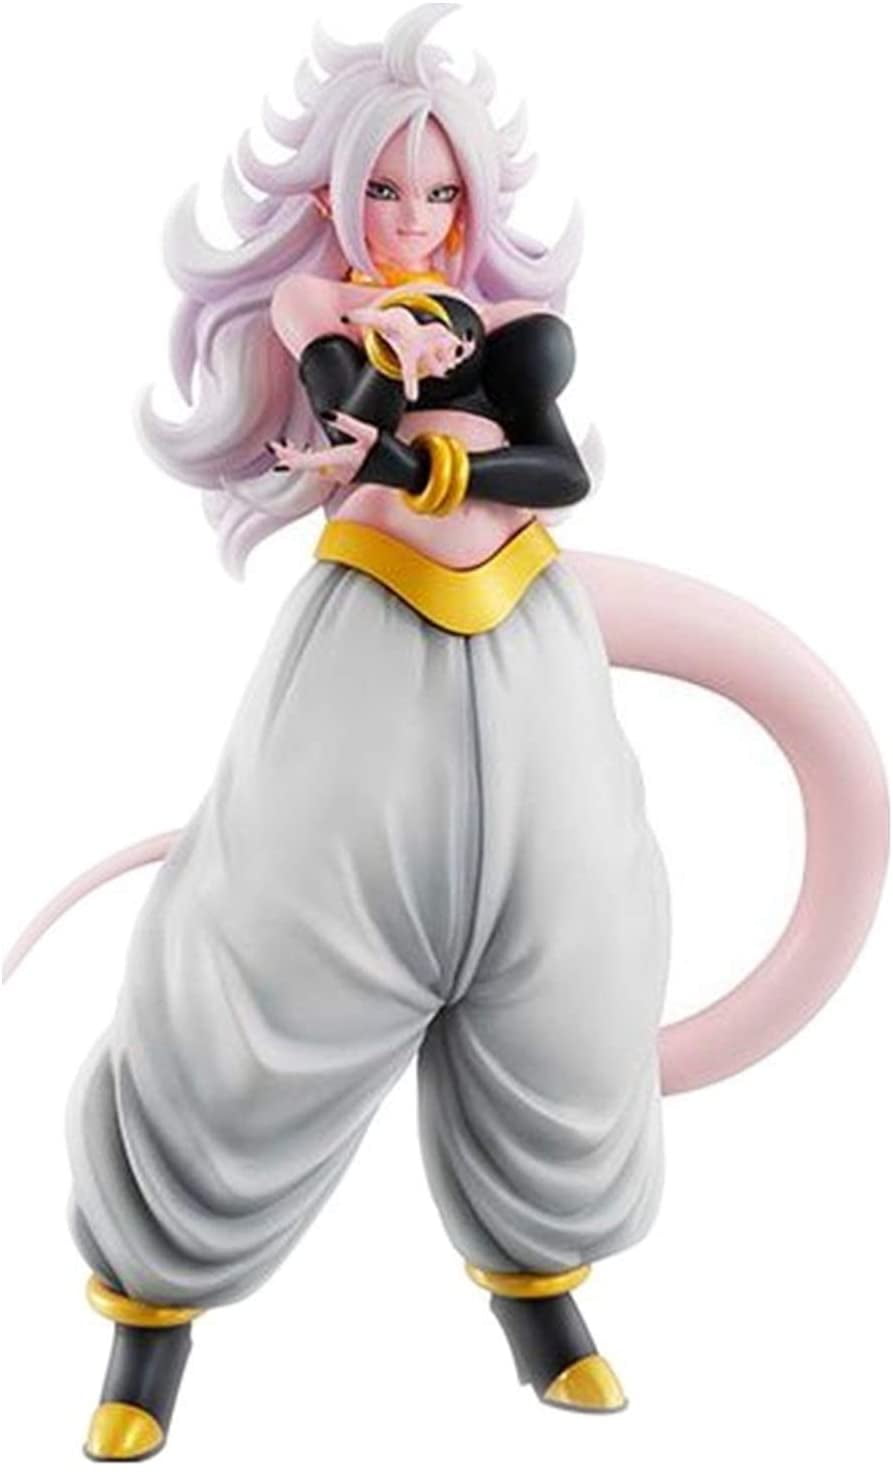 S.H.Figuarts DRAGON BALL FighterZ ANDROID No.21 Action Figure BANDAI NEW 